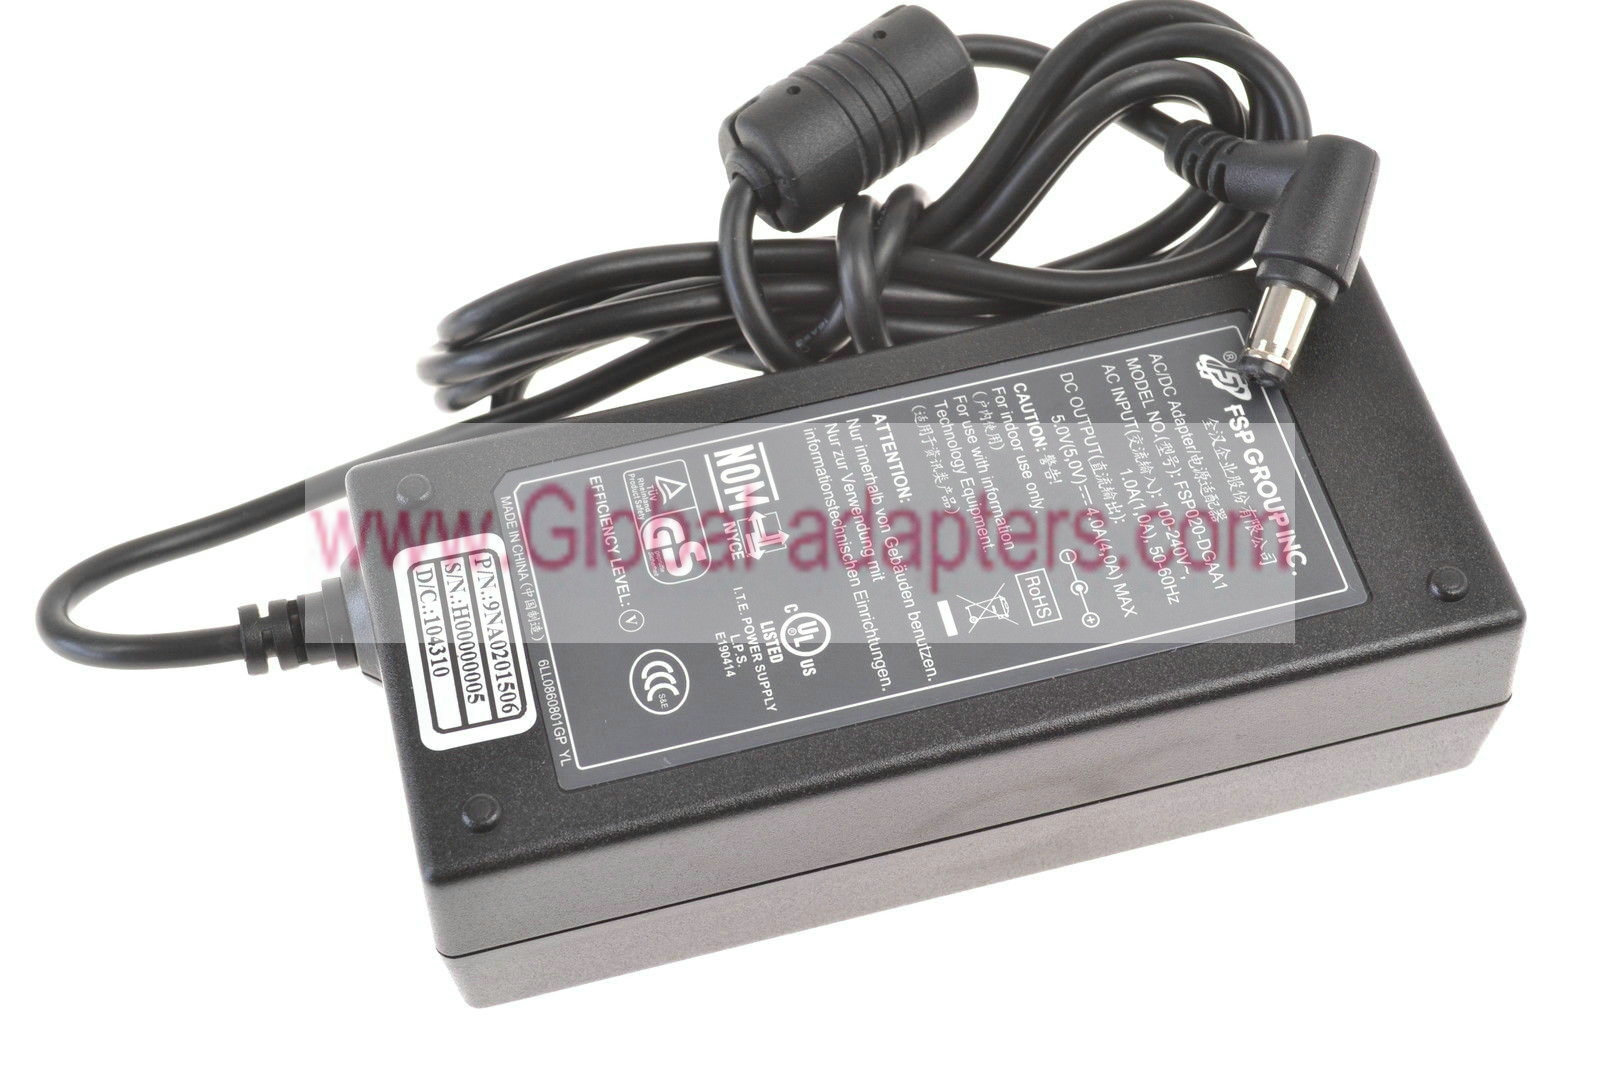 New Original FSP Group FSP020-DGAA1 5.0V 4.0A AC/DC Adapter power charger - Click Image to Close